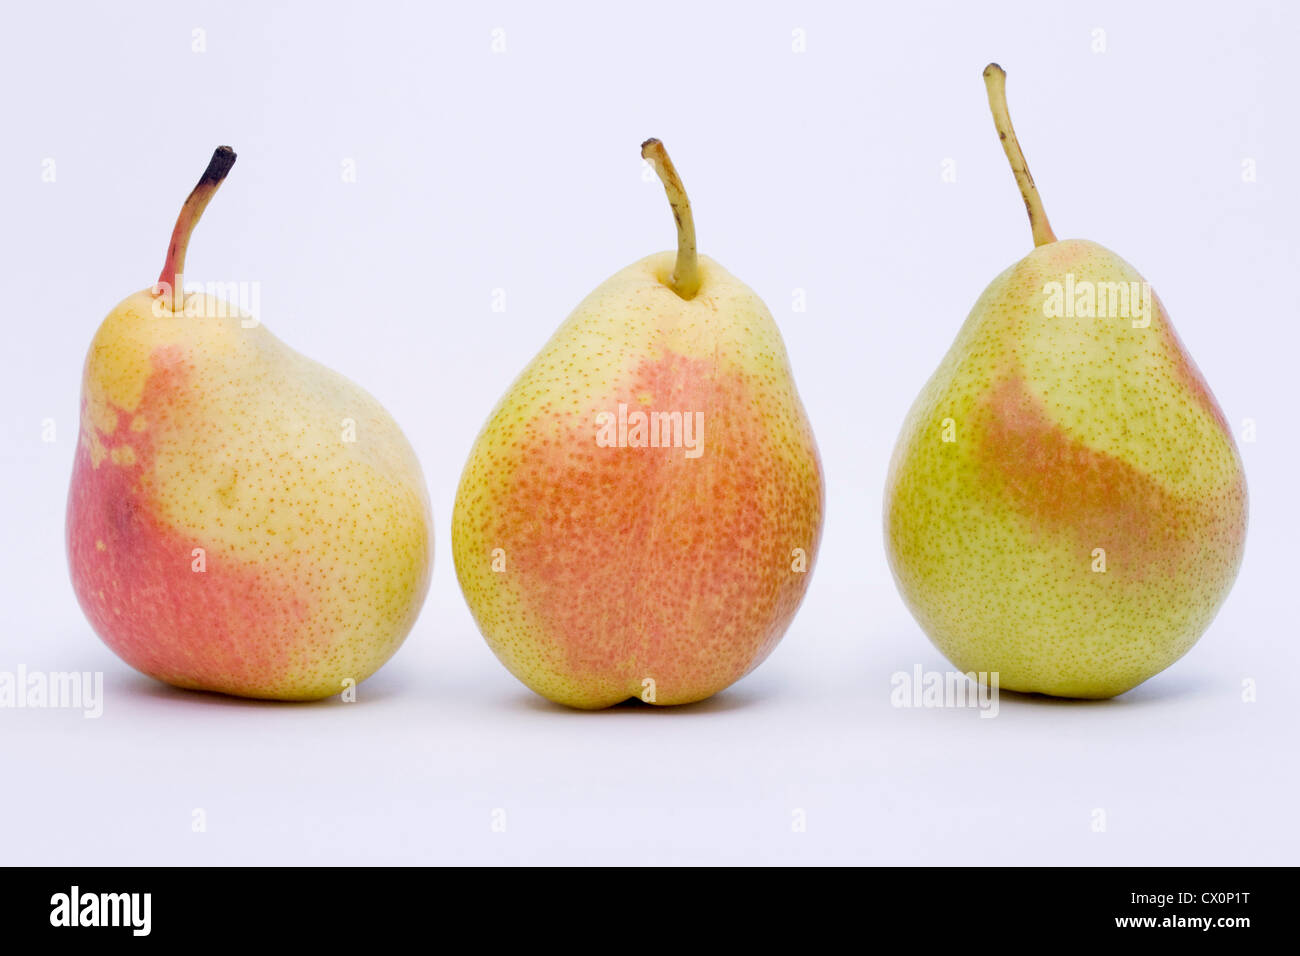 Pyrus communis 'Forelle'. A row of three red blush dessert pears on a white background. Stock Photo